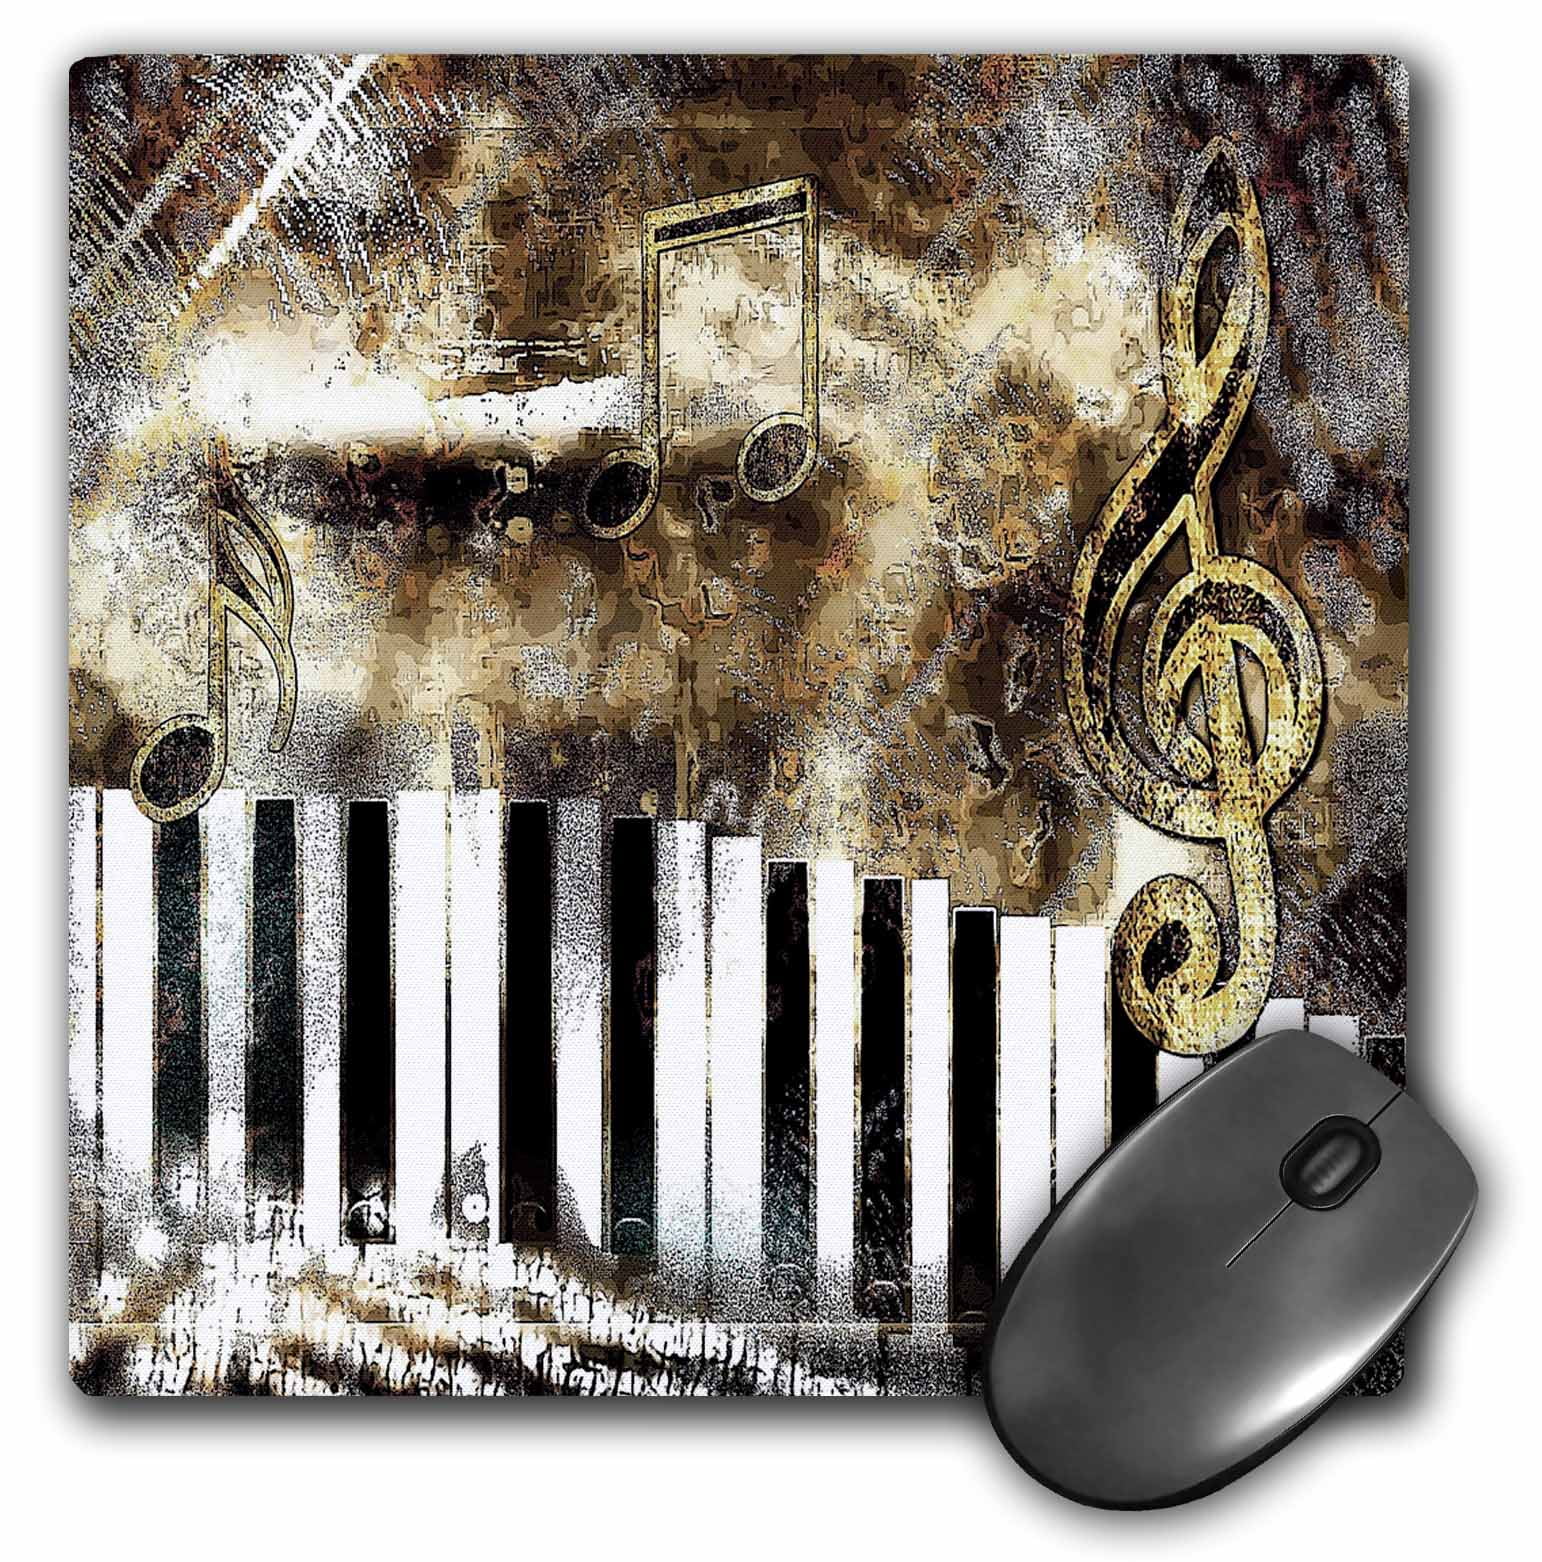 8 by 8-inch 3dRose 3D Rose A Wavy Keyboard On A Blue Abstract Background with Musical Notes-Framed Tile ft_111605_1 